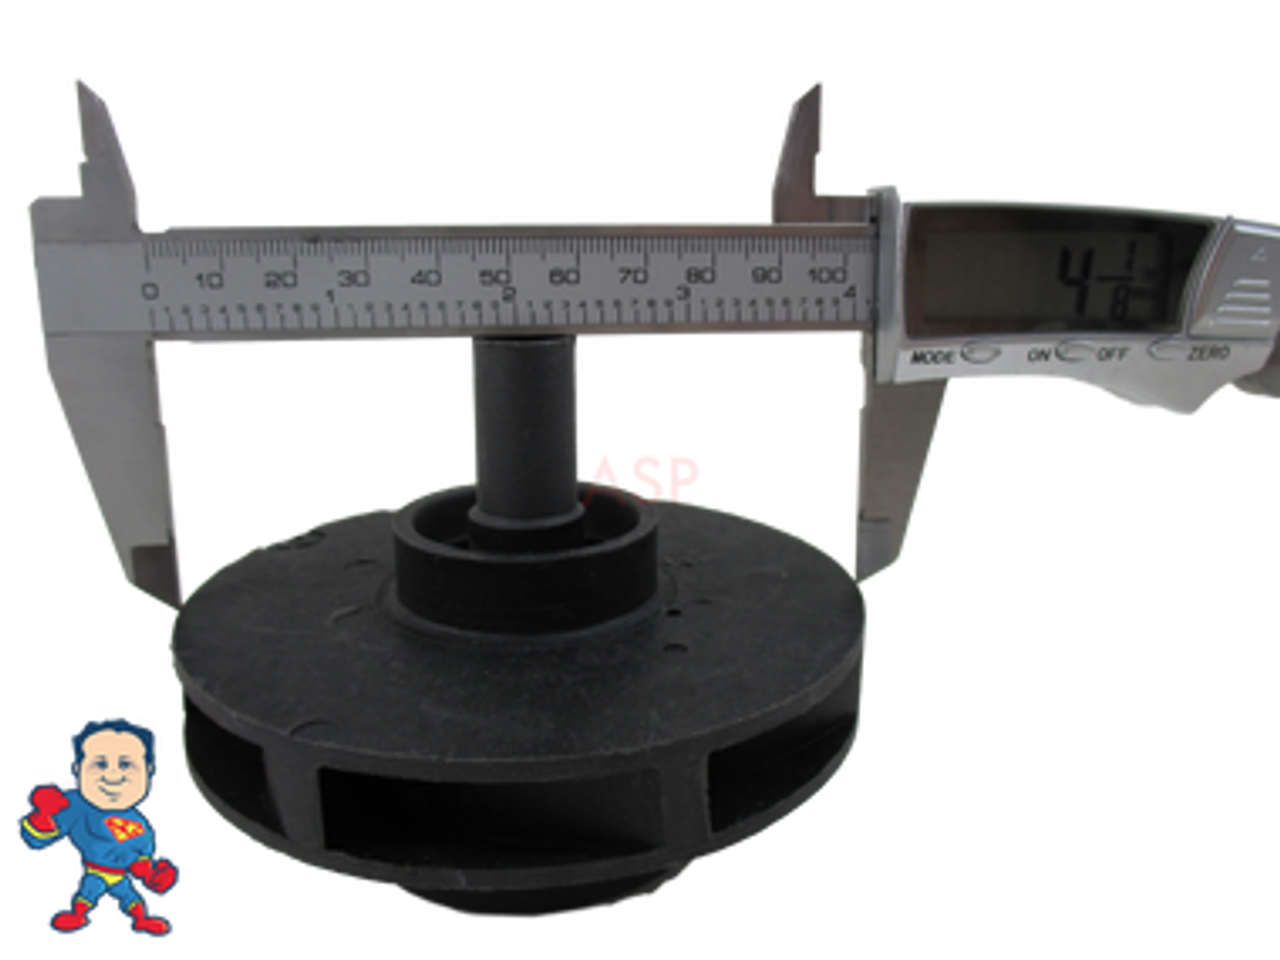 Spa Hot Tub Pump 2HP Impeller fits Intertek LX200 or LP200 56FR WUA Video How To
Note: These Impellers have been redesigned so the original will not measure the same as the replacement.. You would bas your choice on the numbers on the motor.. LP200, WUA200